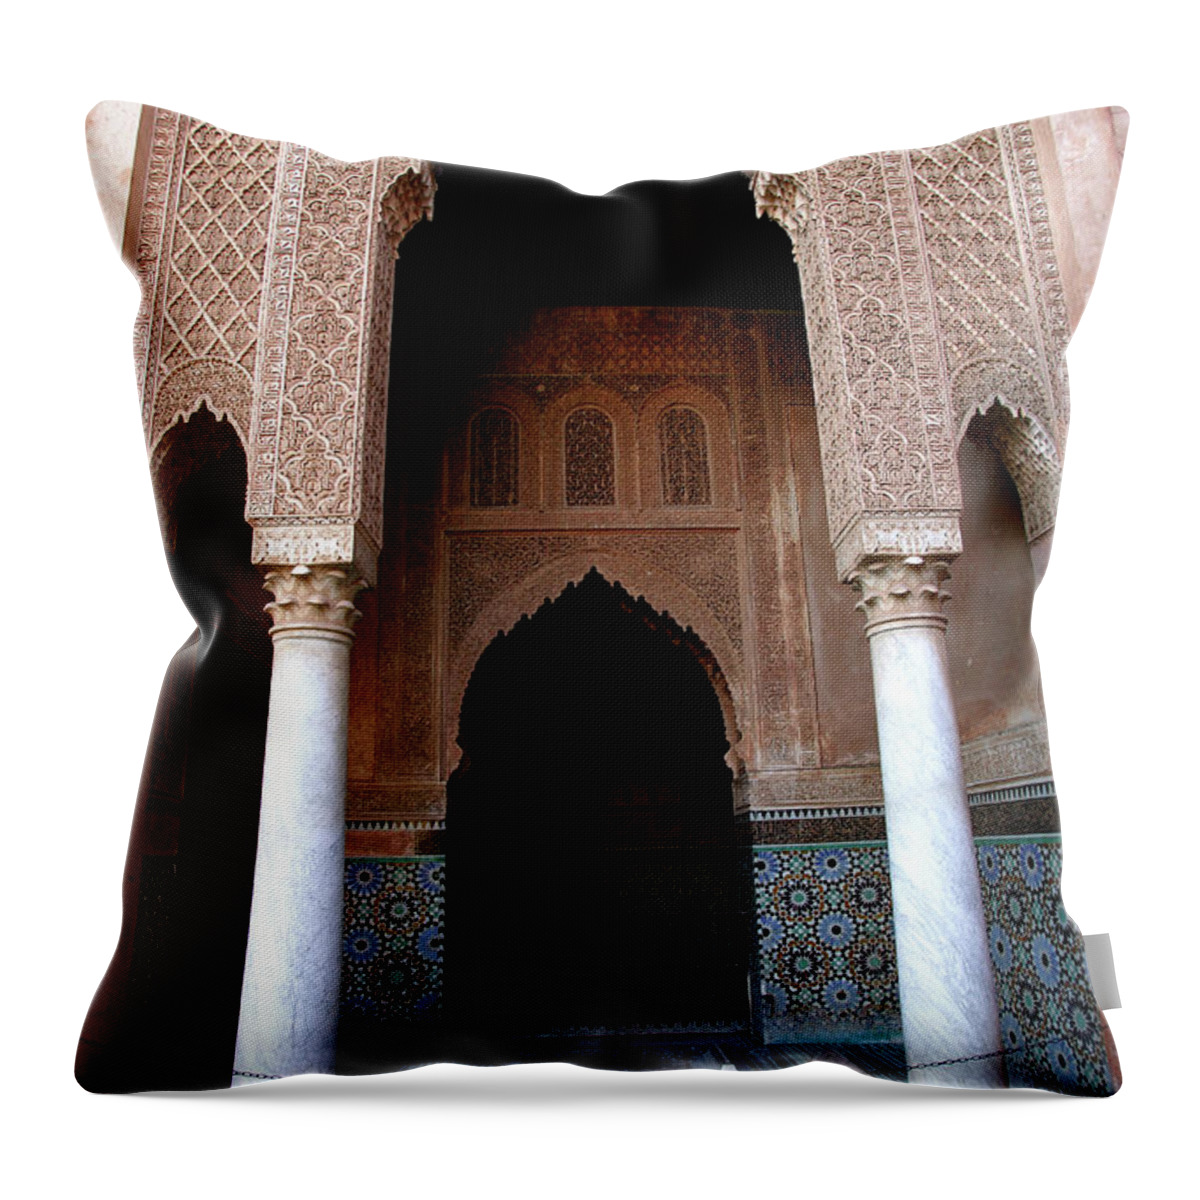 Arch Throw Pillow featuring the photograph Columned Archway At Saadian Tombs by Lonely Planet